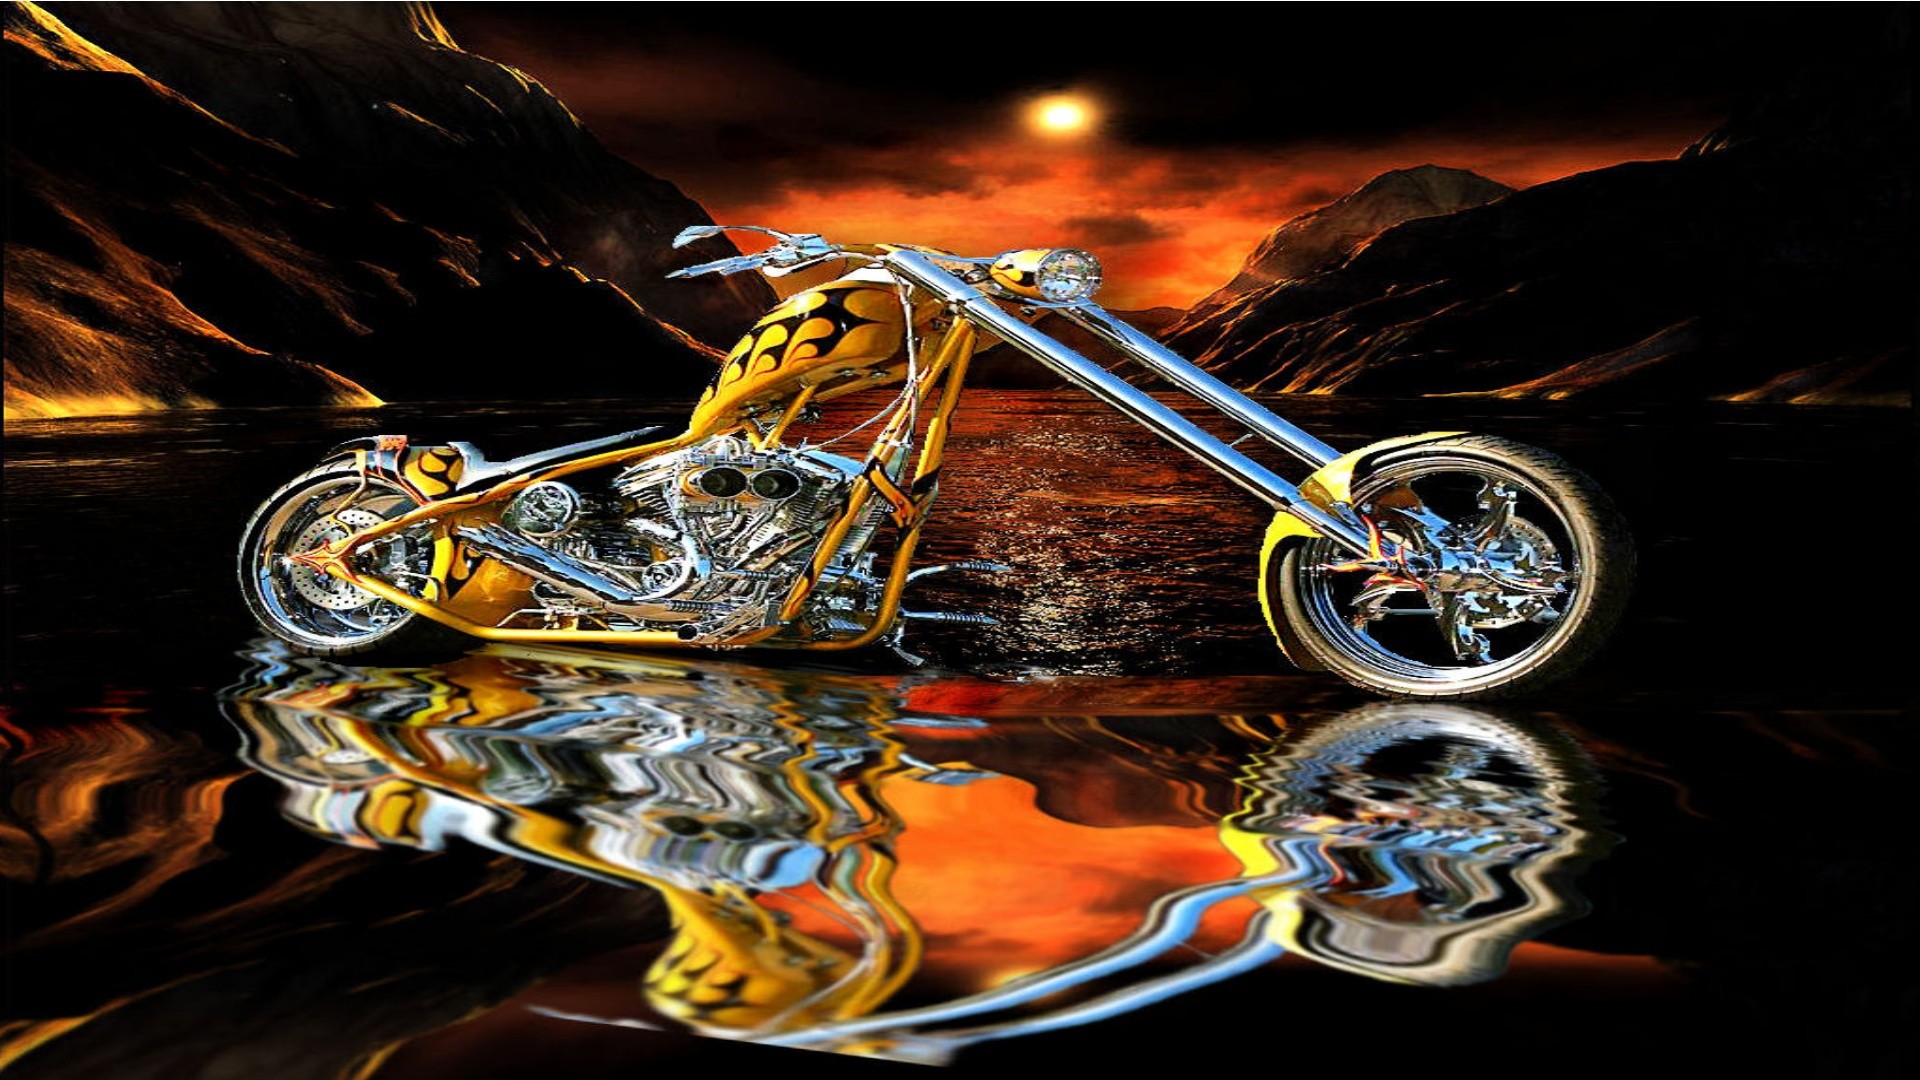 1920x1080 Free HD Choppers wallpapers, West Cost Choppers theme bikes, Amazing  Motocycle Westcoast choppers Orange